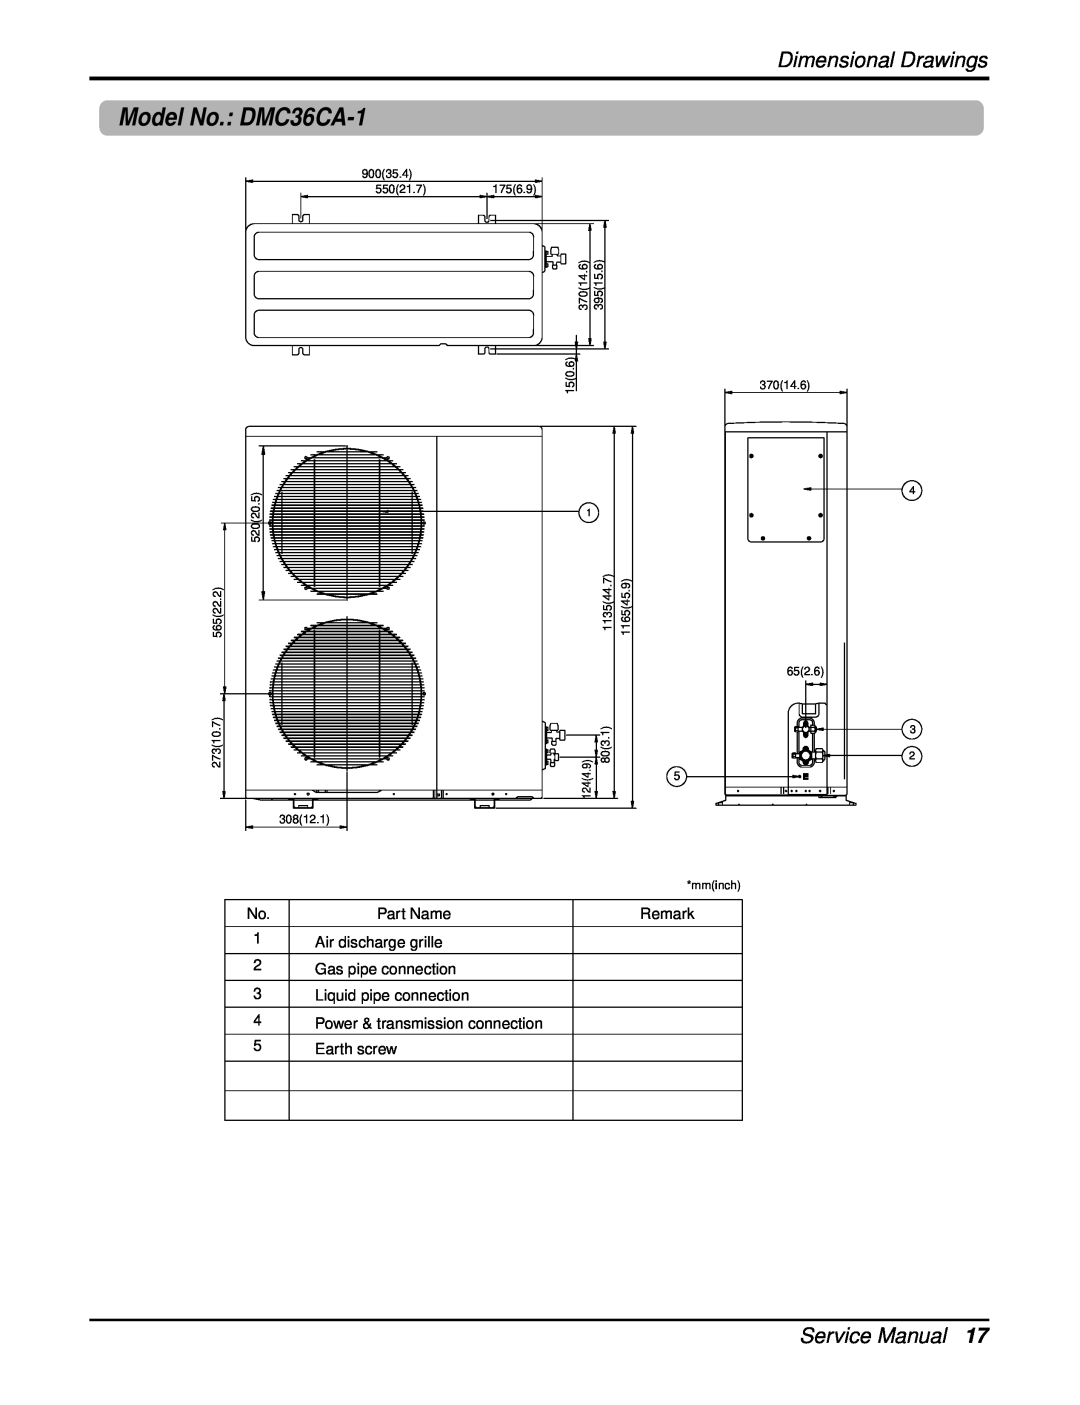 Heat Controller manual Model No. DMC36CA-1, Dimensional Drawings, Part Name, 1Air discharge grille 2Gas pipe connection 